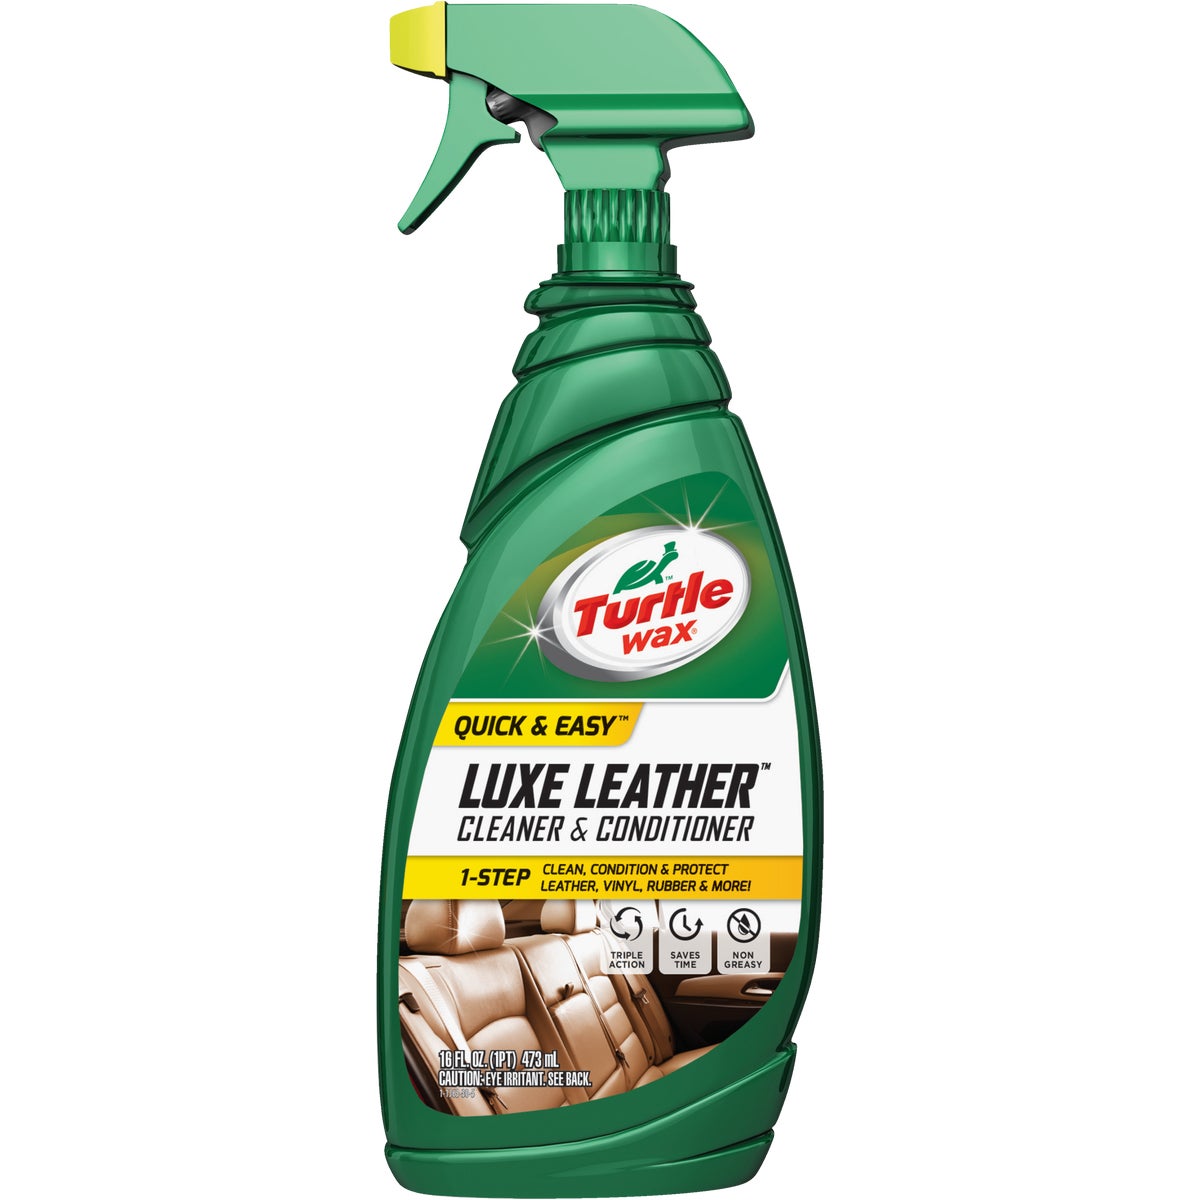 Turtle Wax Luxe Leather 16 Oz.Trigger Spray Leather Cleaner